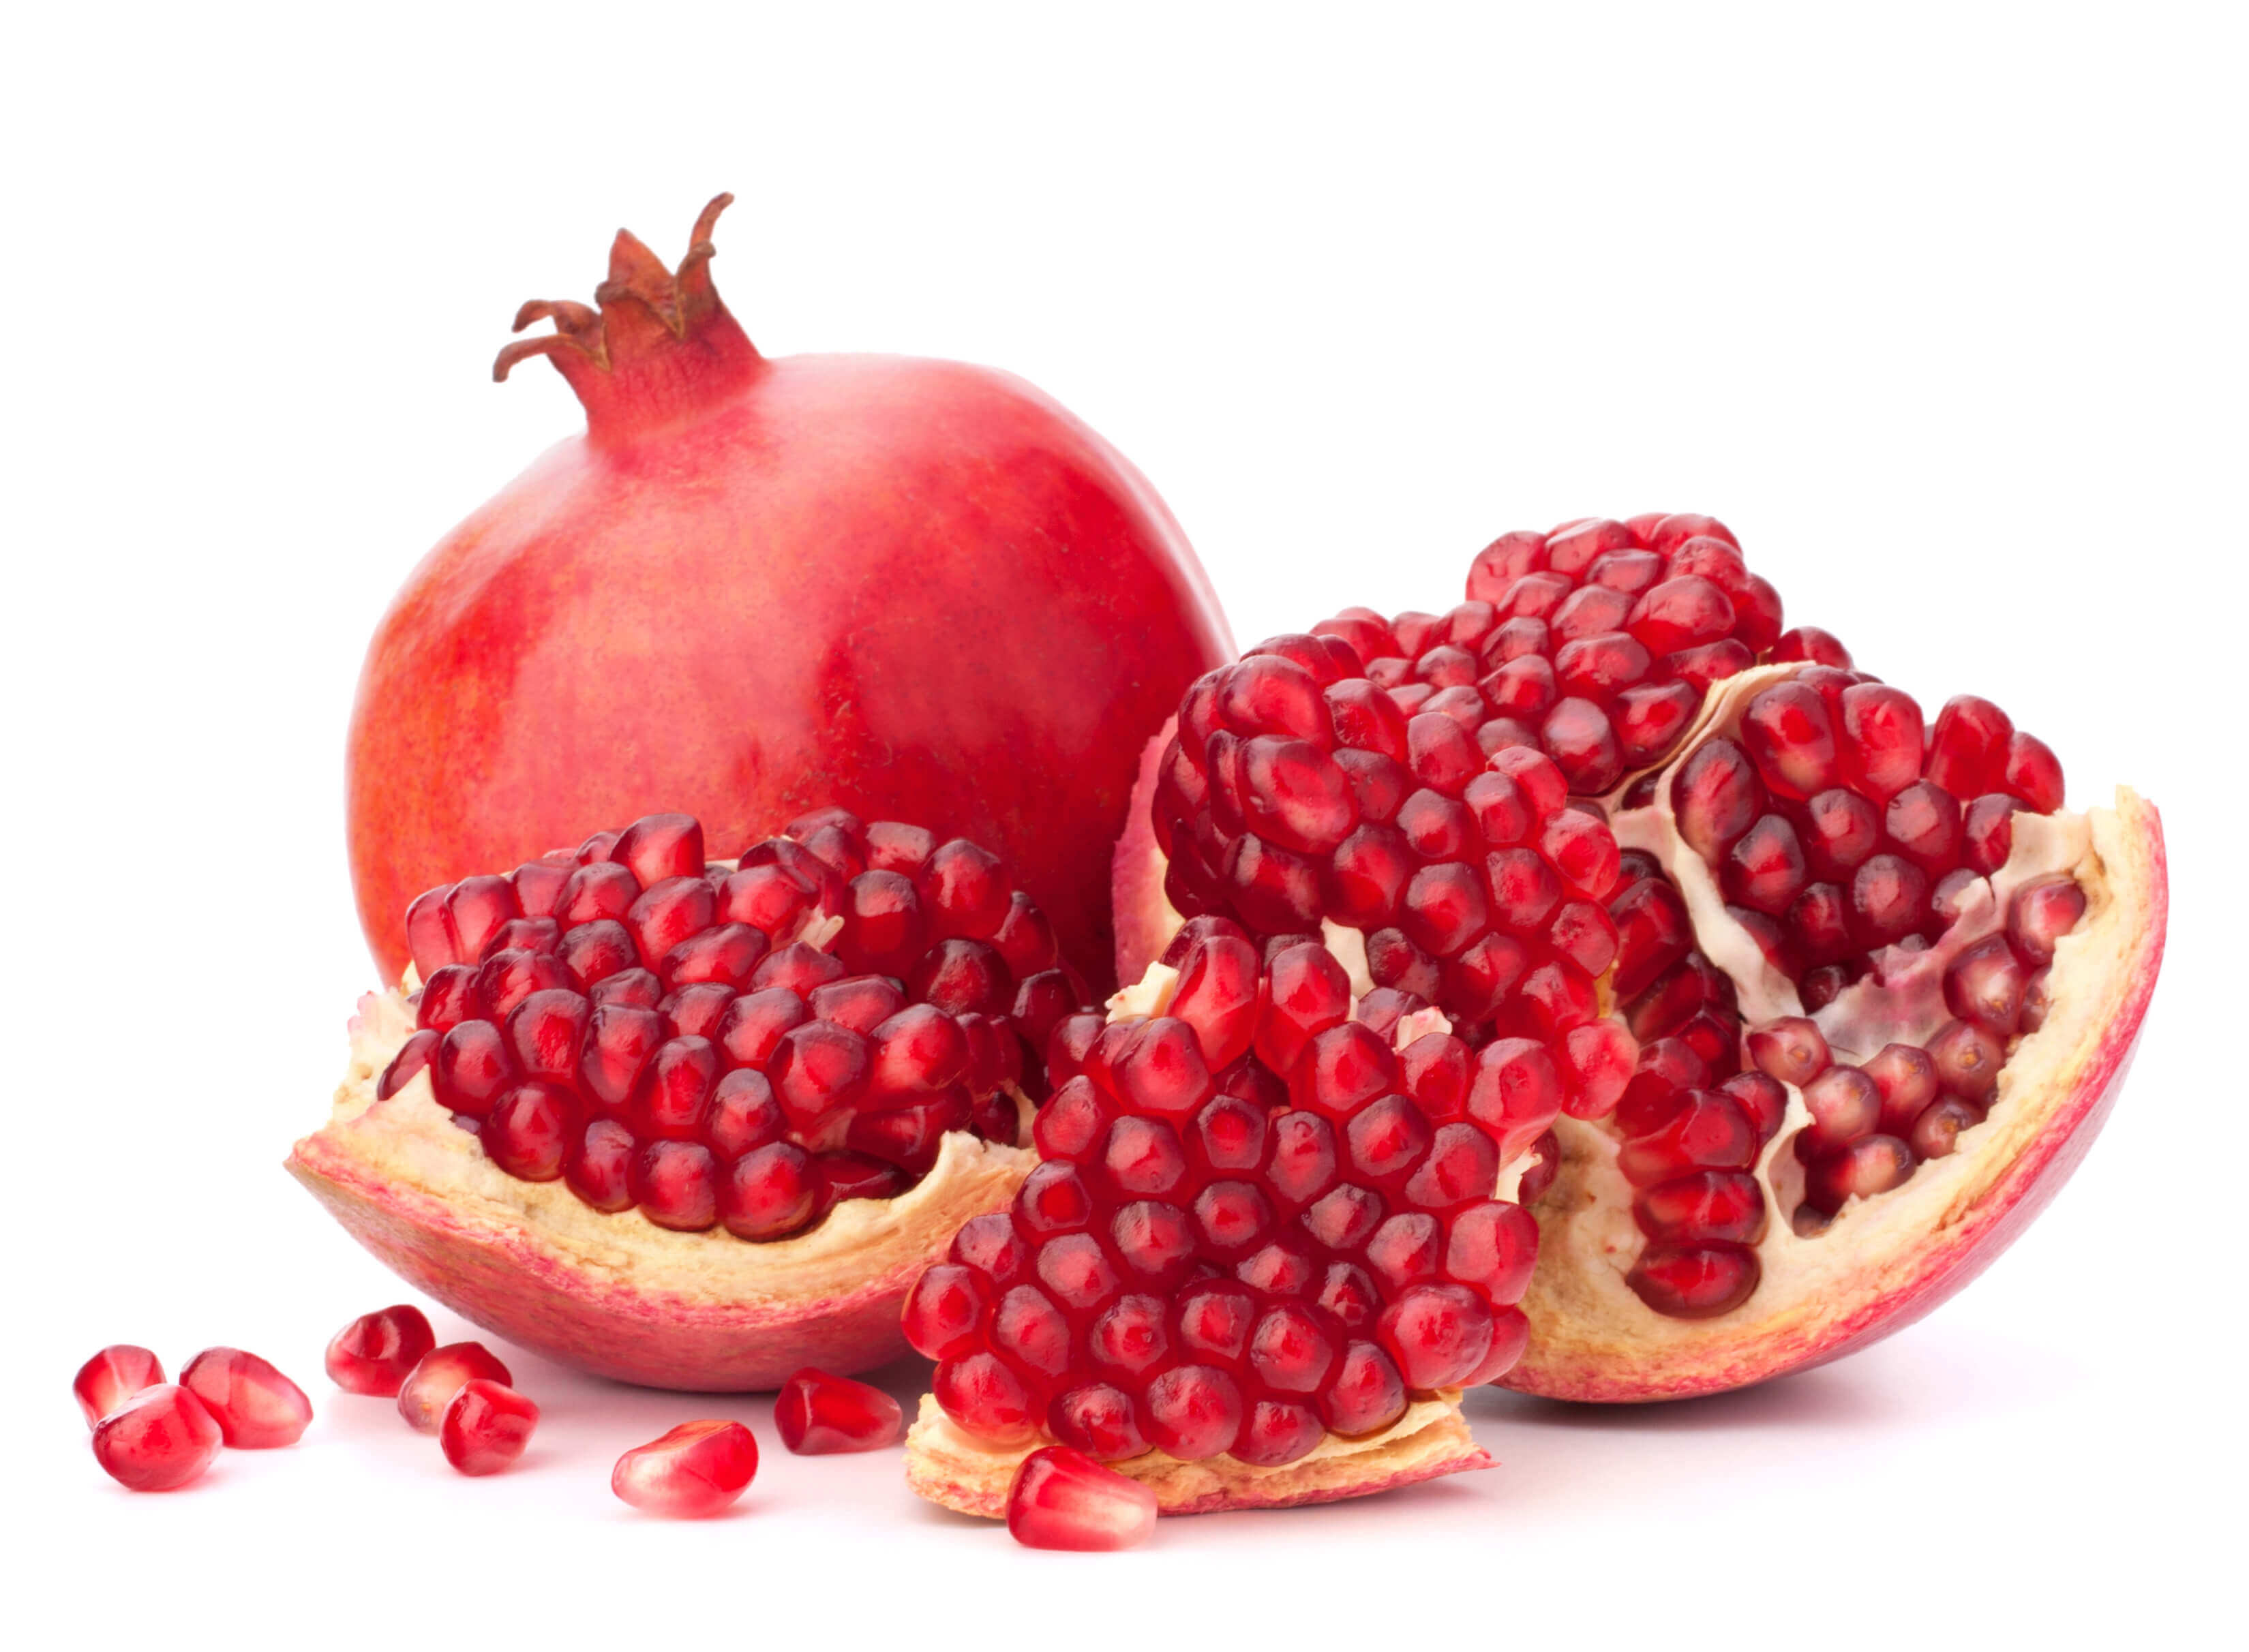 Pomegranate image - Agro trade for import & export [Mahdy Fresh - since 2000]